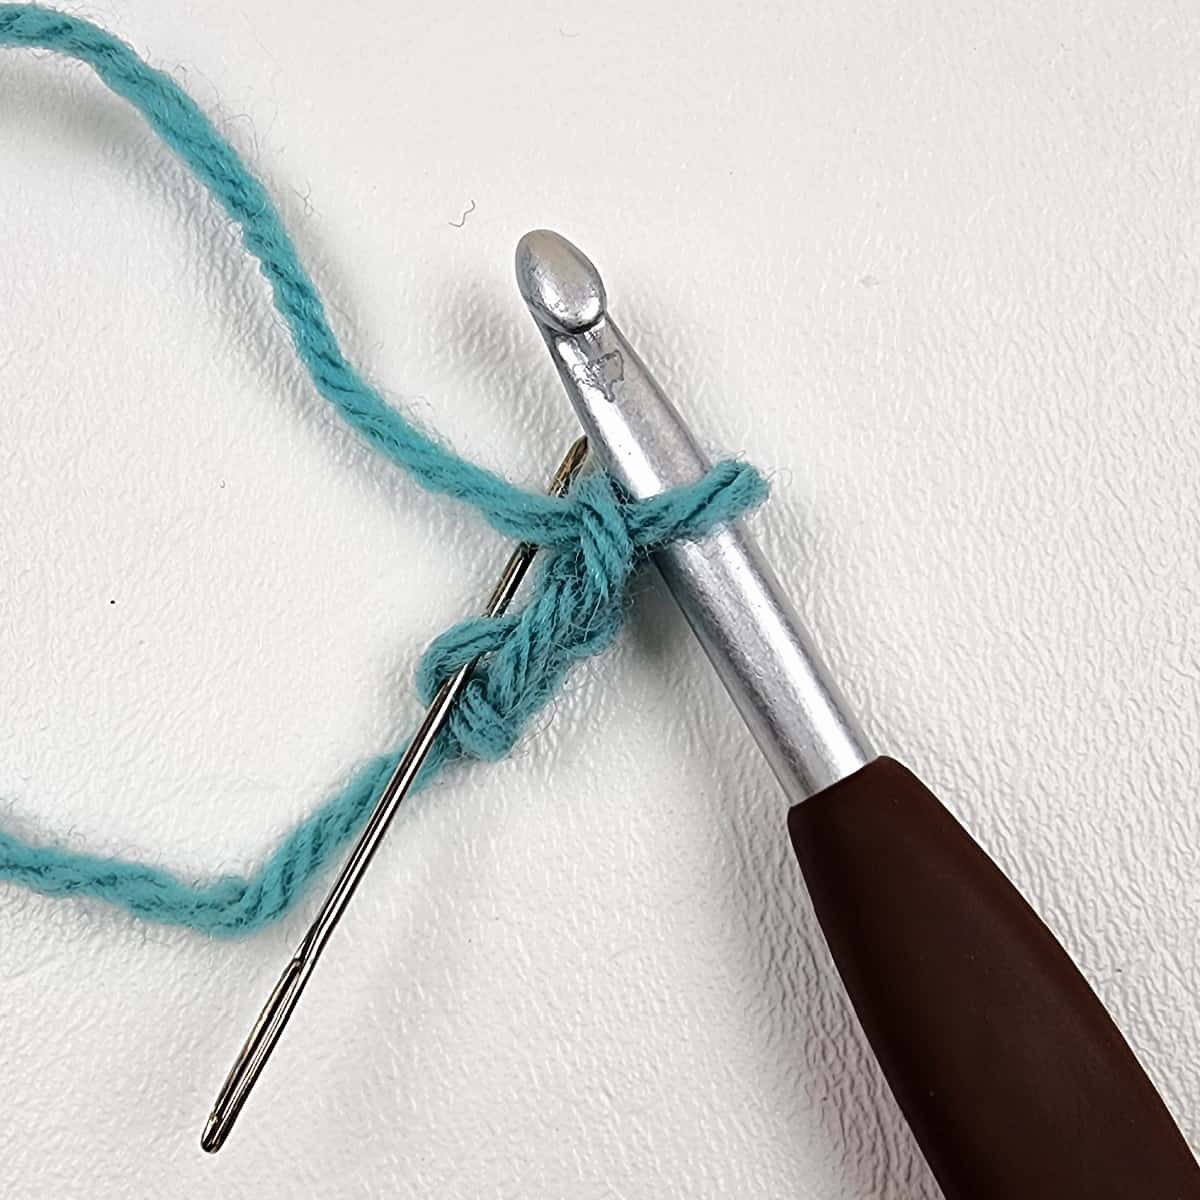 Brown crochet hook and green yarn with a chain two.